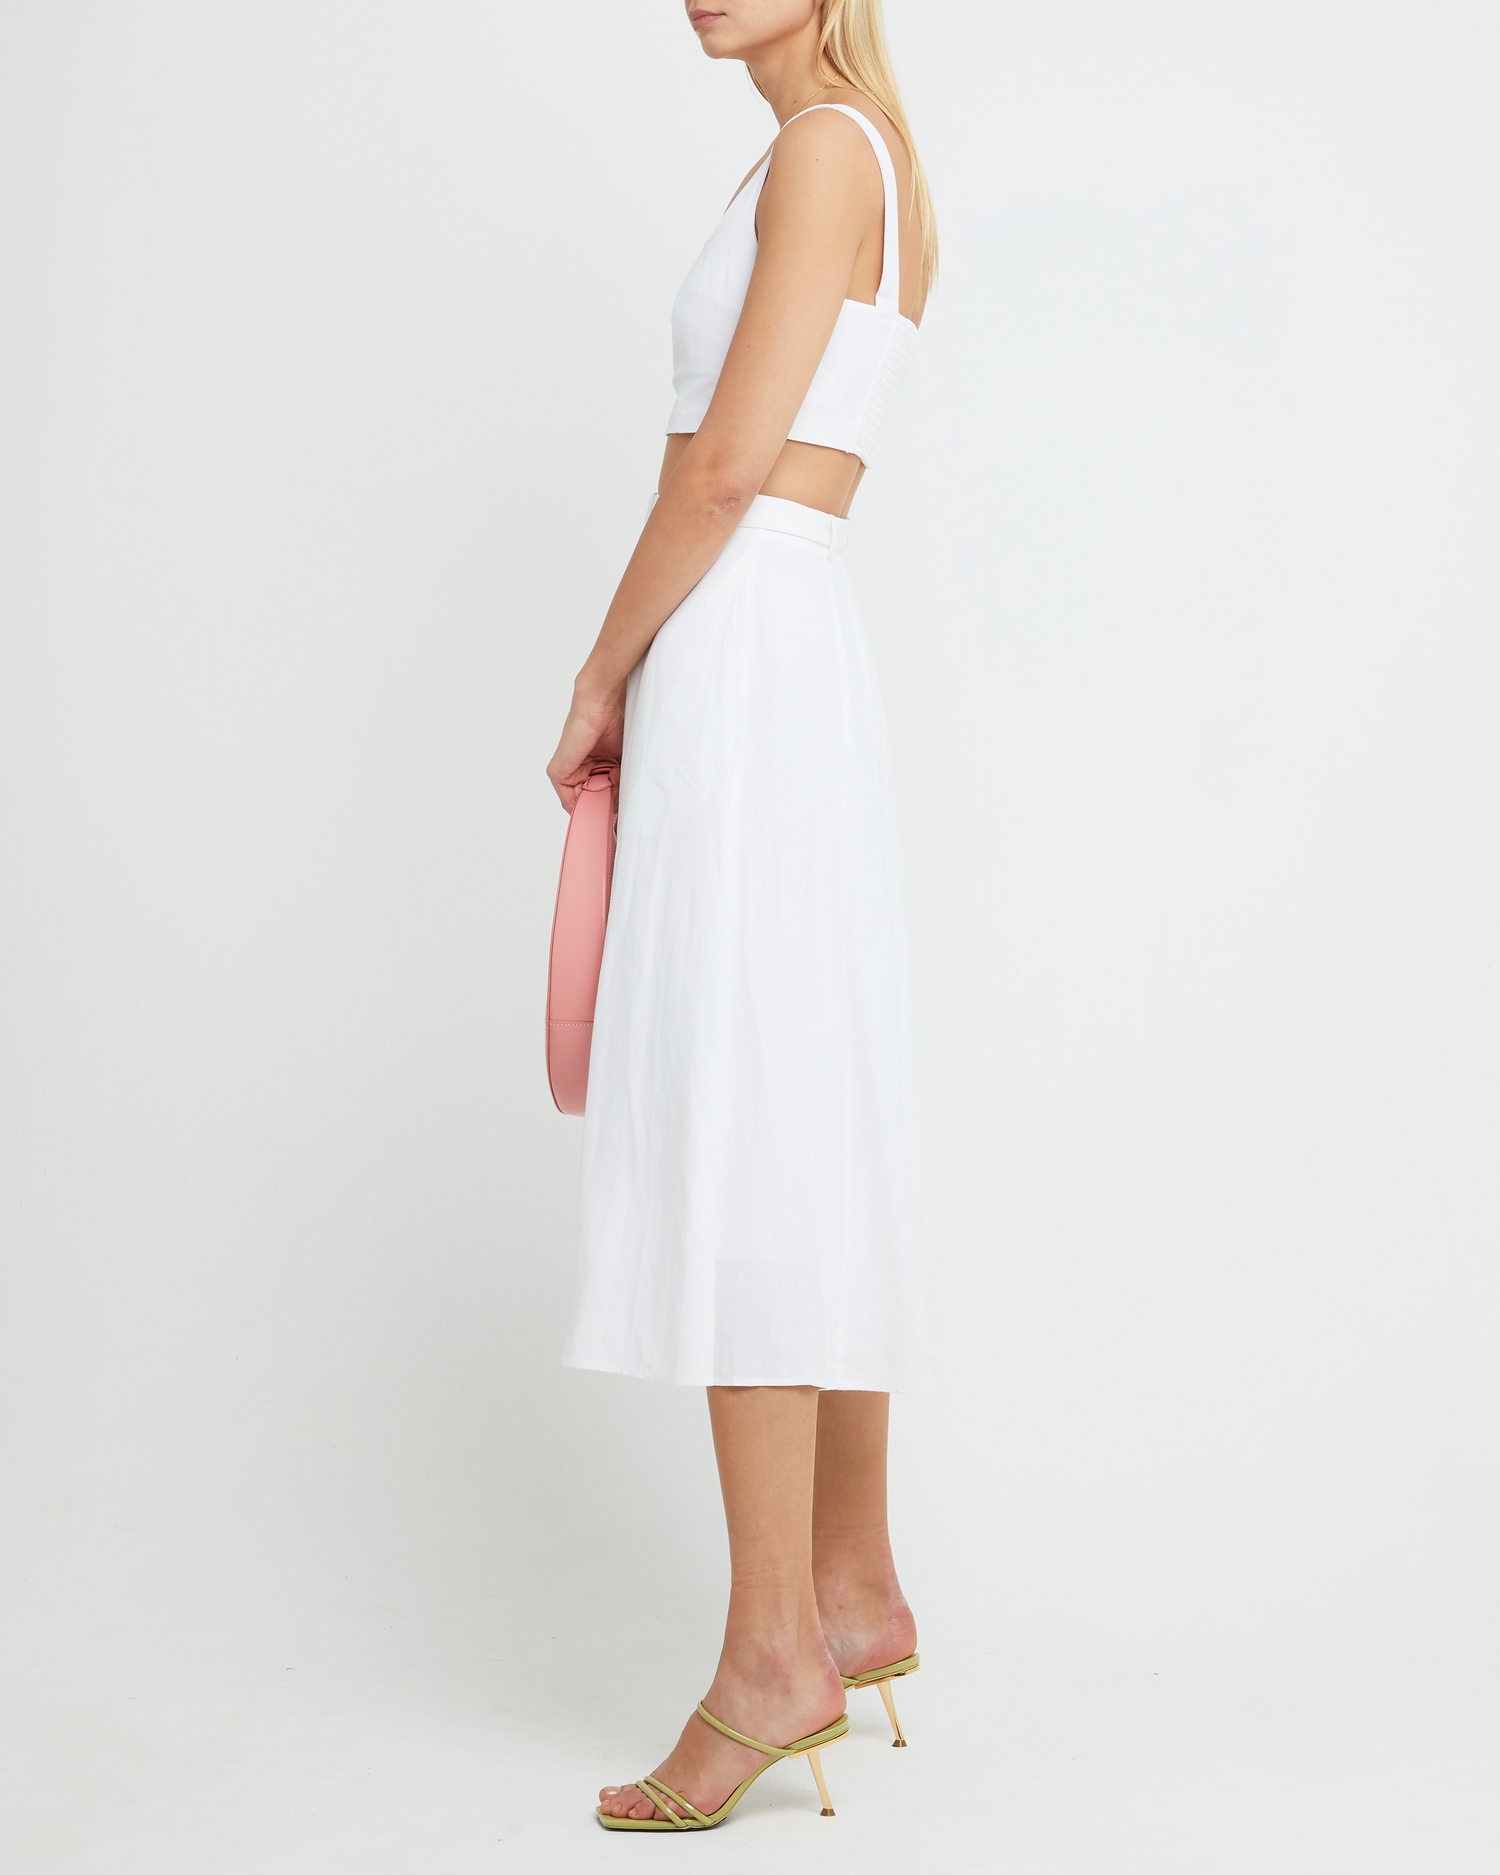 Fifth image of Samara Set, a white top and maxi skirt, tank, seperates, square neckline